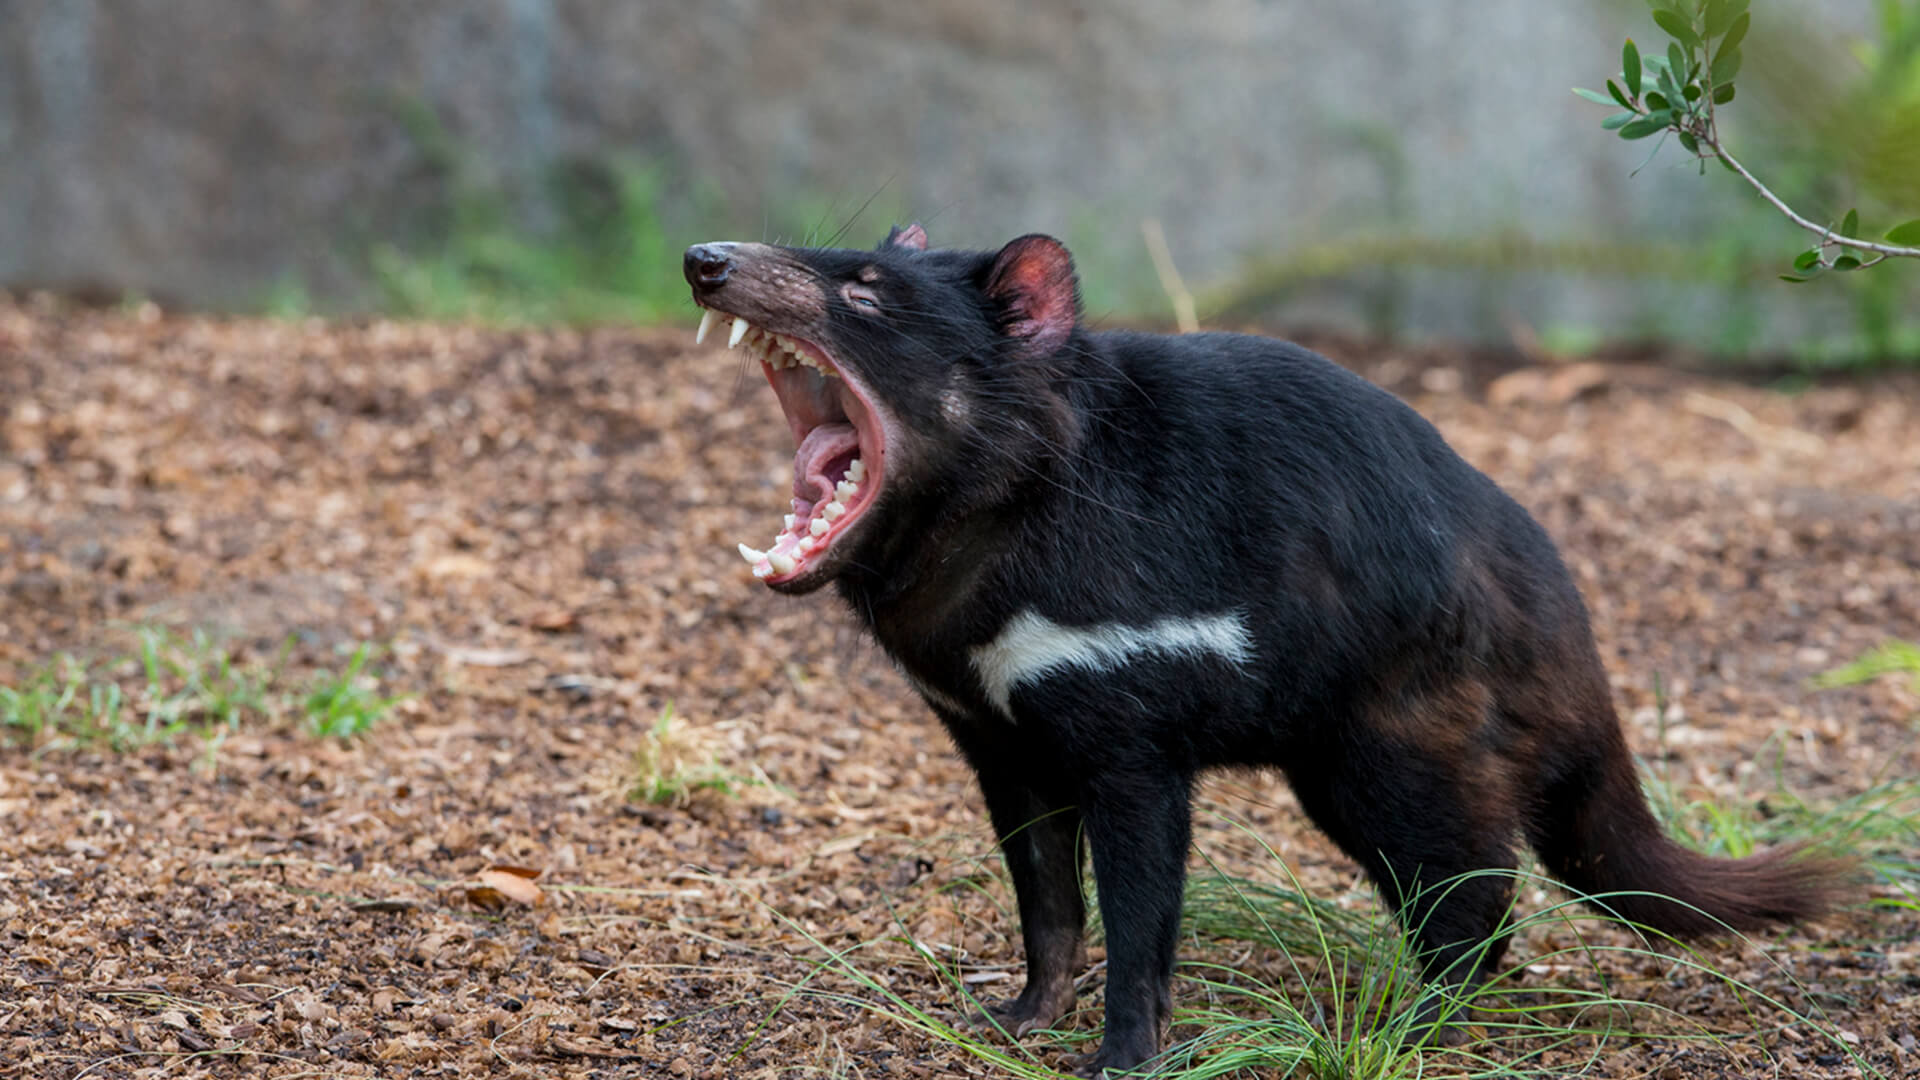 A Tasmanian devil opens its mouth wide to let out a growl